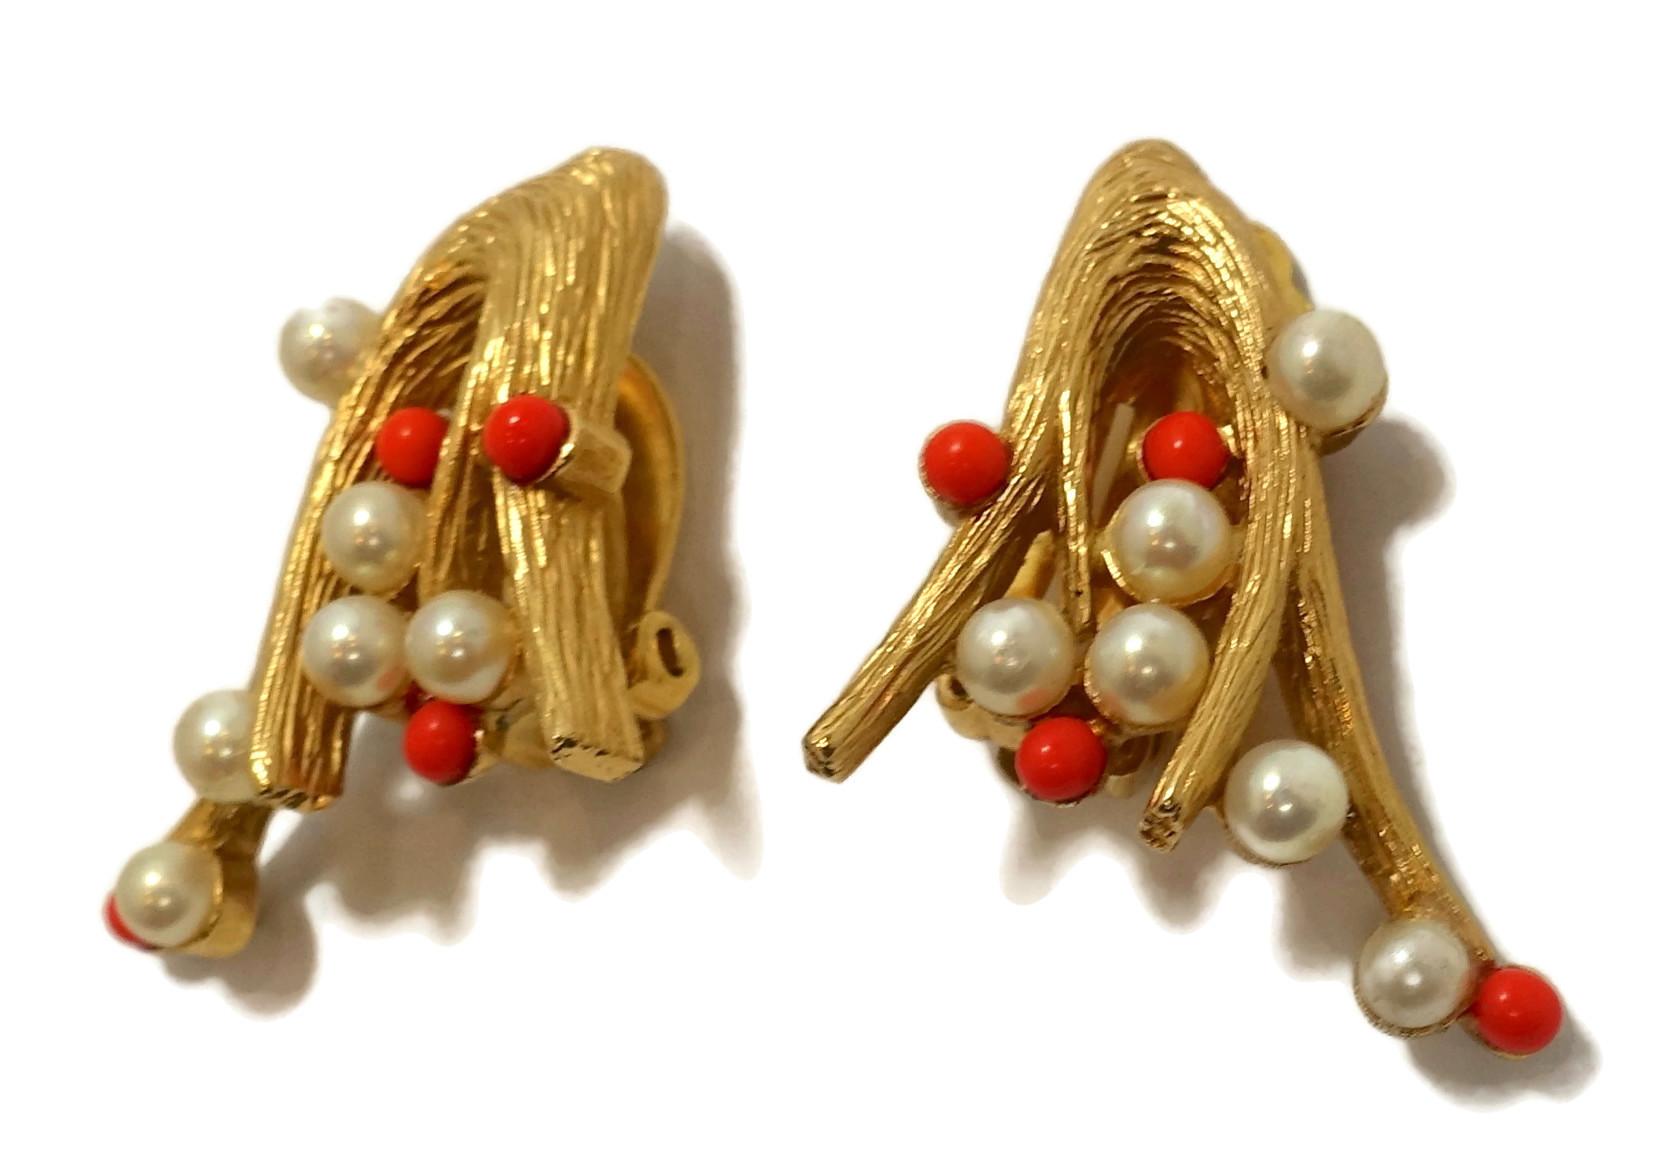 These vintage signed Joseph Mazer earrings have  faux pearls and faux coral beads in a gold tone setting.  In excellent condition, these clip earrings measure 1-3/8” x 3/4” and are signed “Joseph Mazer”.